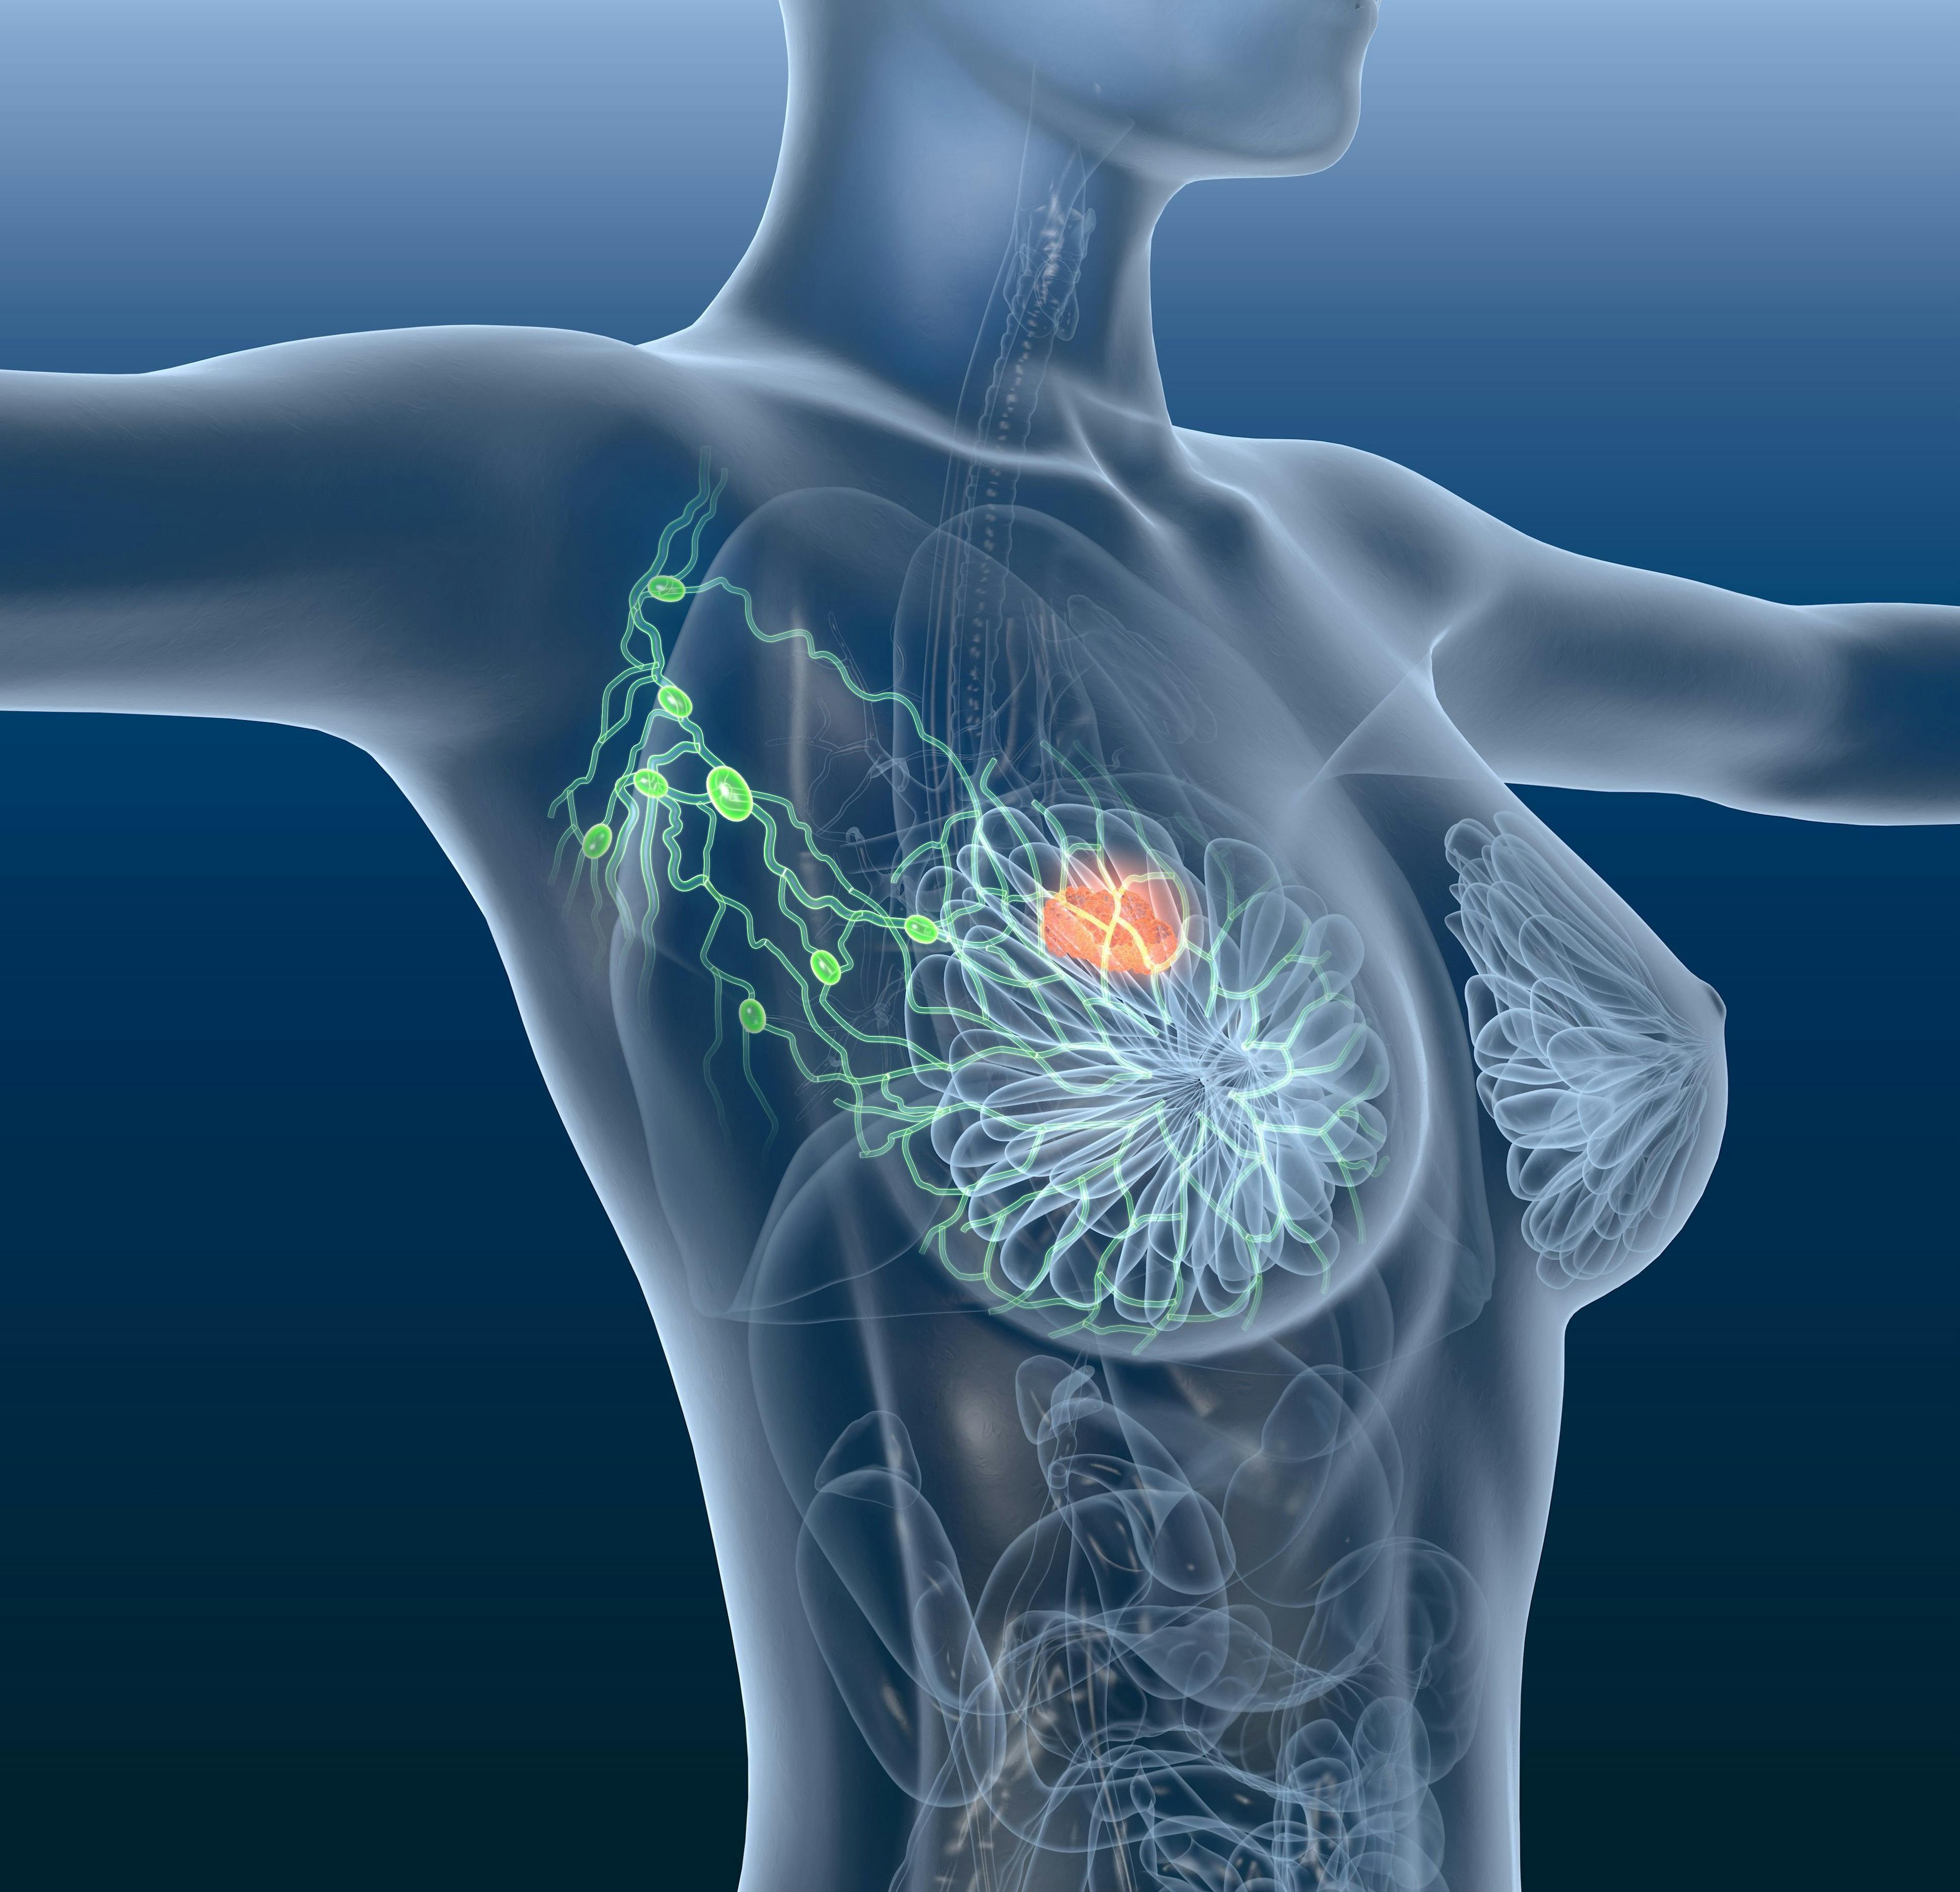 Poor Health-Related Quality of Life May be Associated With Increased Mortality Among Breast Cancer Survivors 